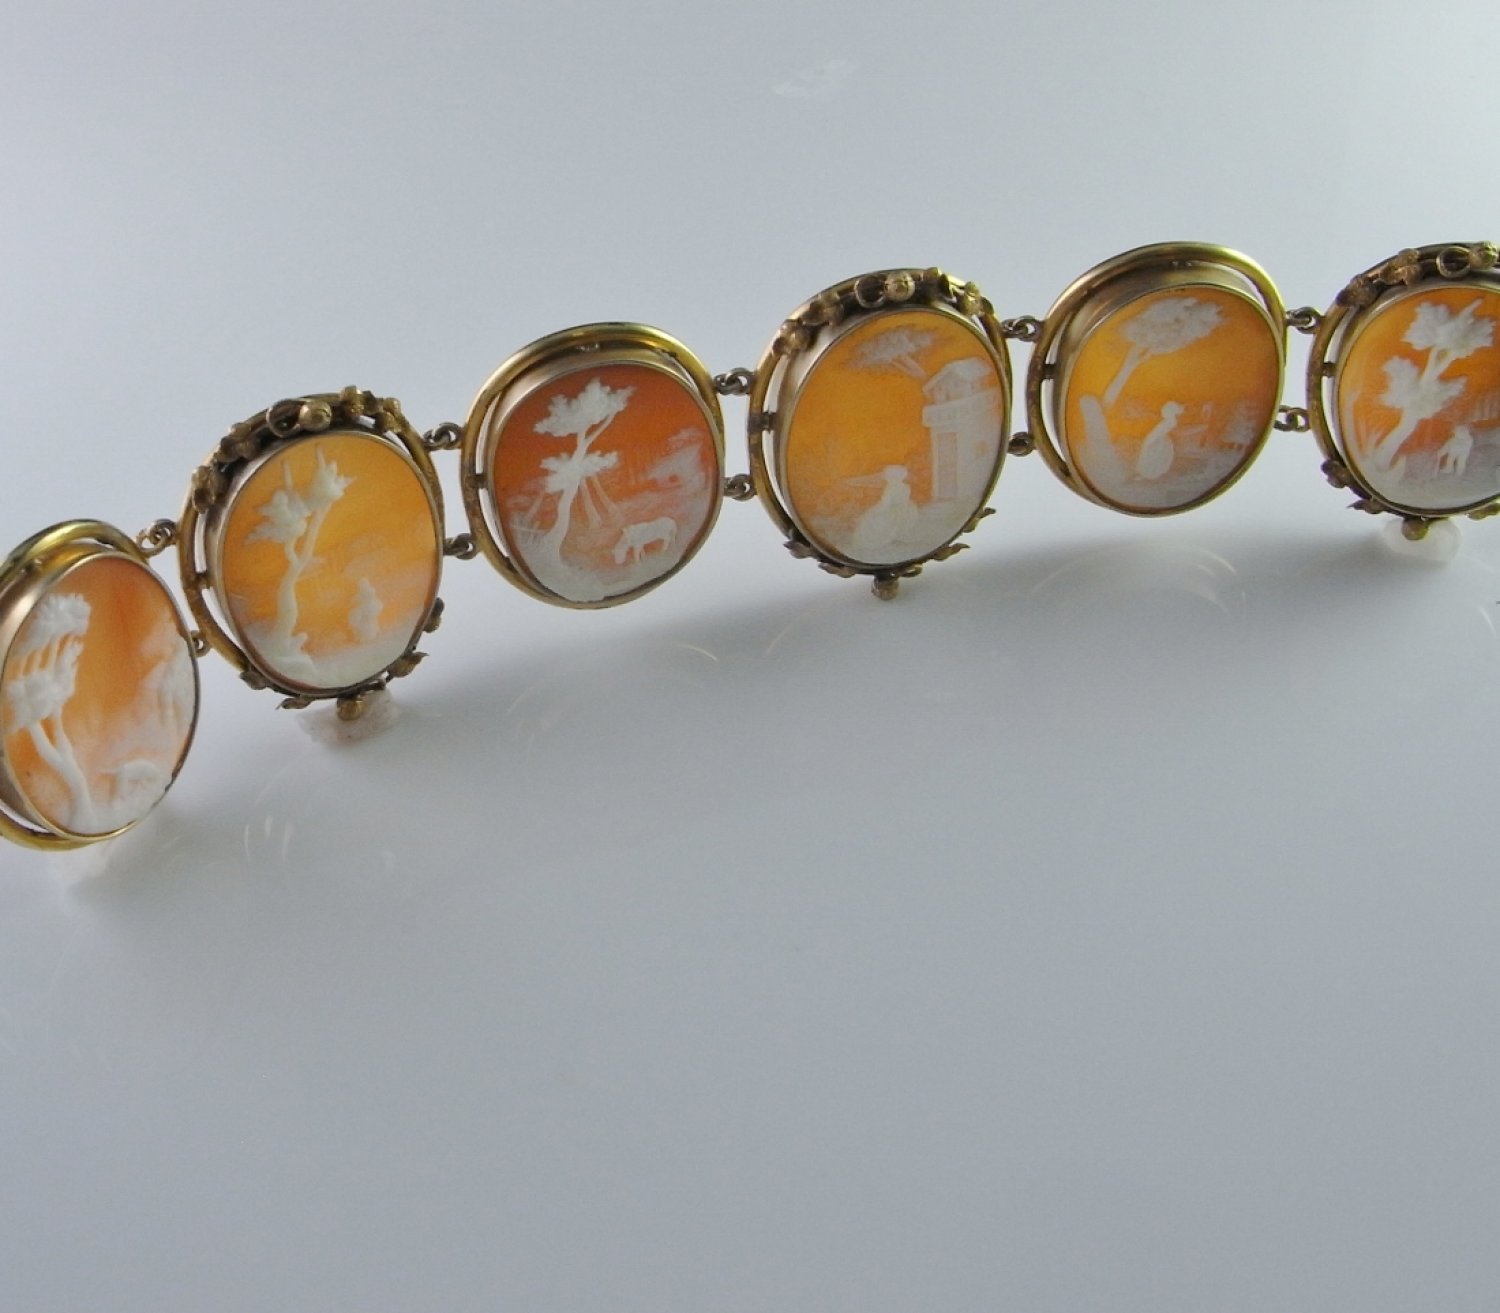 Antique Victorian 1870s Finest Quality Figural Scenic Shell Cameo Bracelet in 14K Yellow Gold